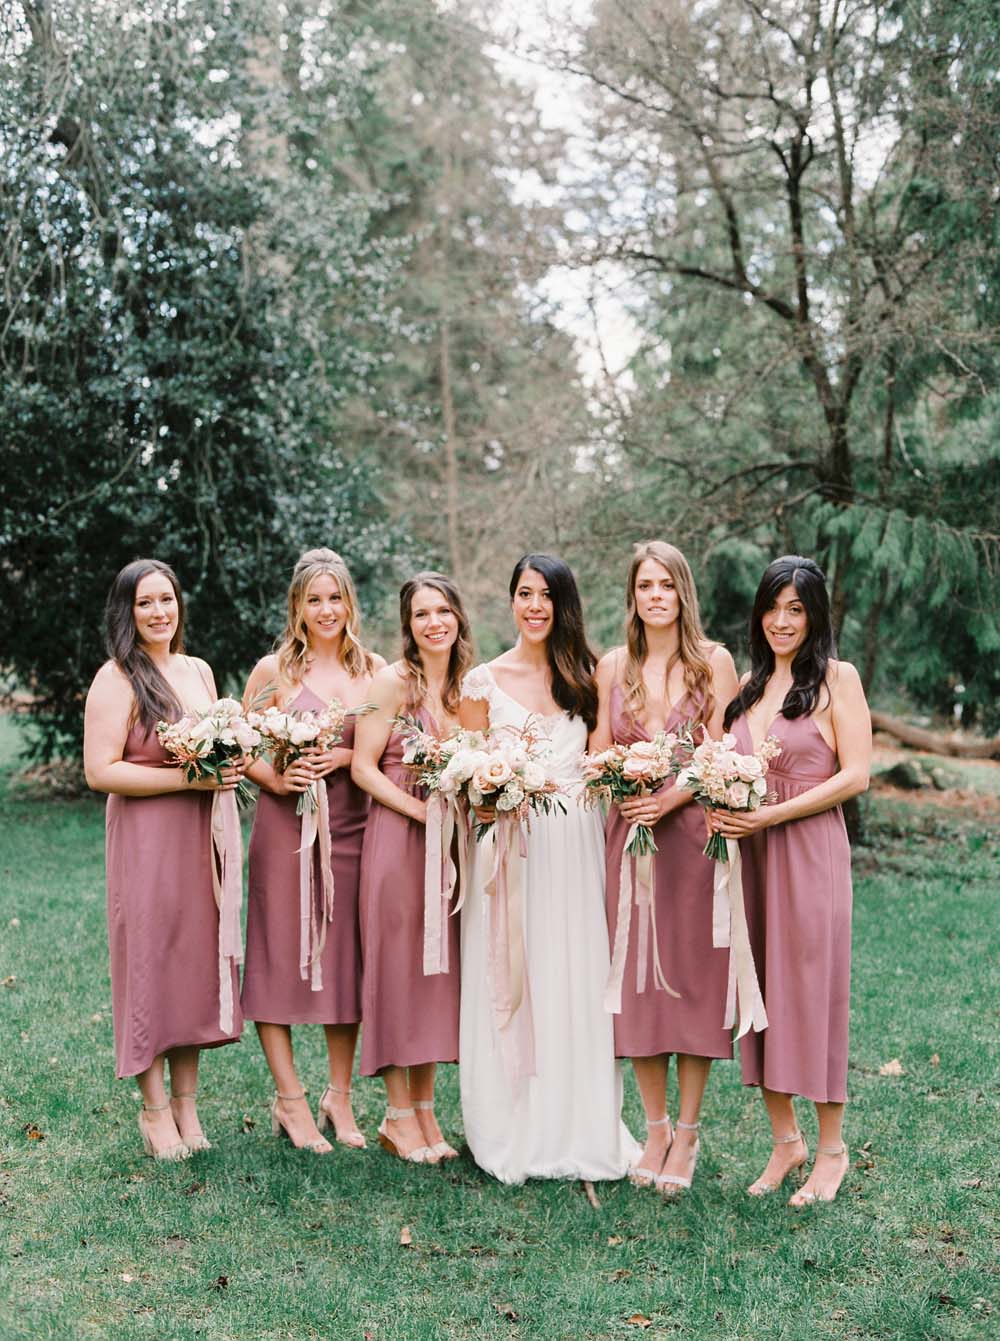 a timeless, romantic wedding in vancouver - bride and bridesmaids